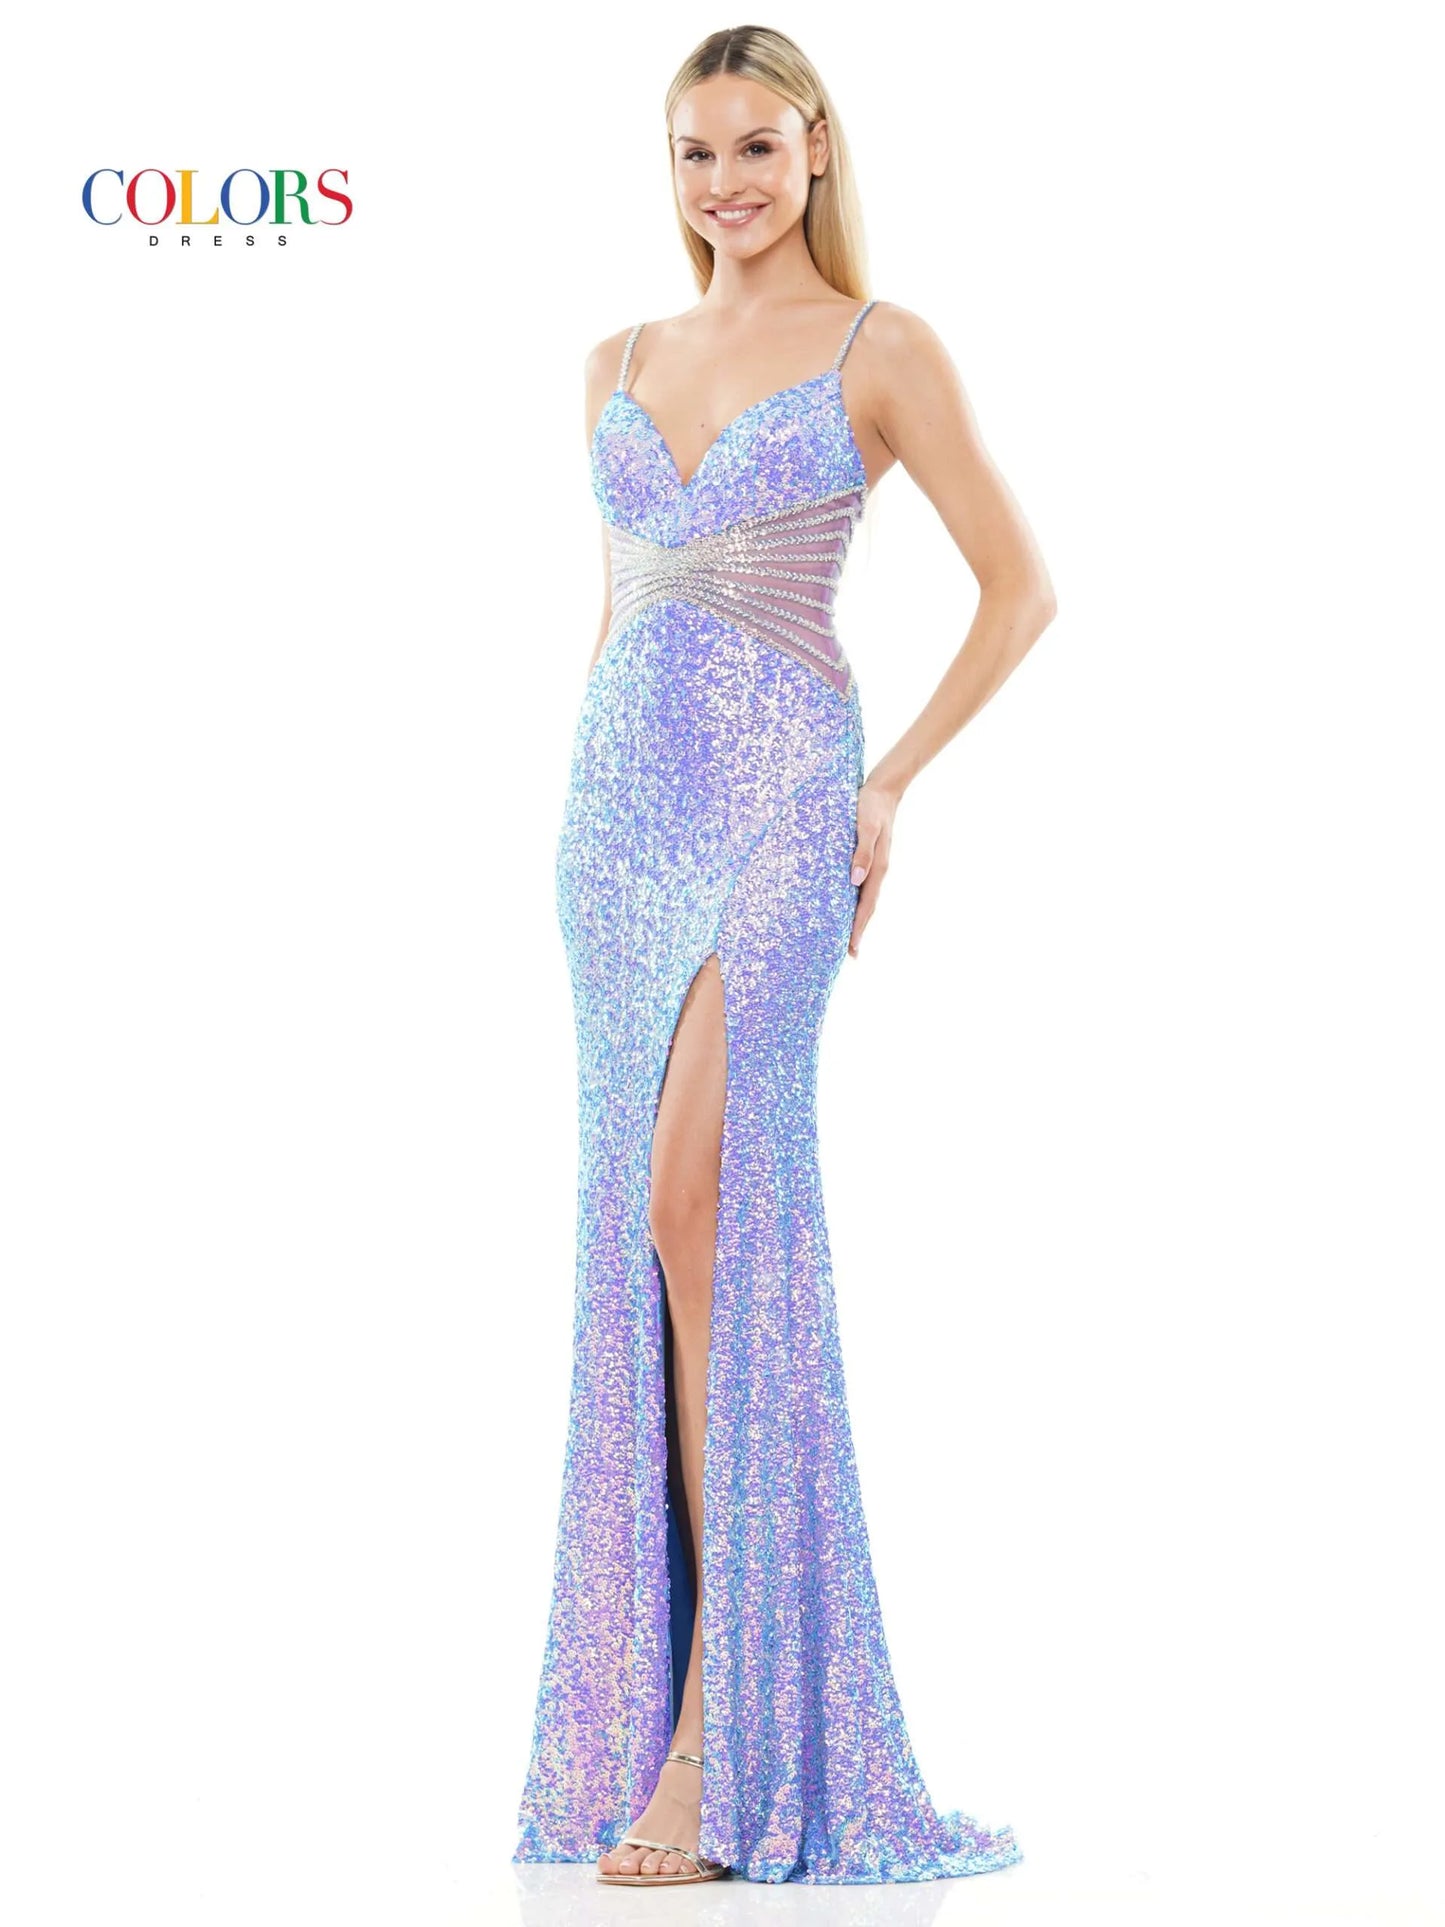 Colors Dress 3300 Long Sequin Sheer Cutout Crystal Lined Prom Dress Co ...